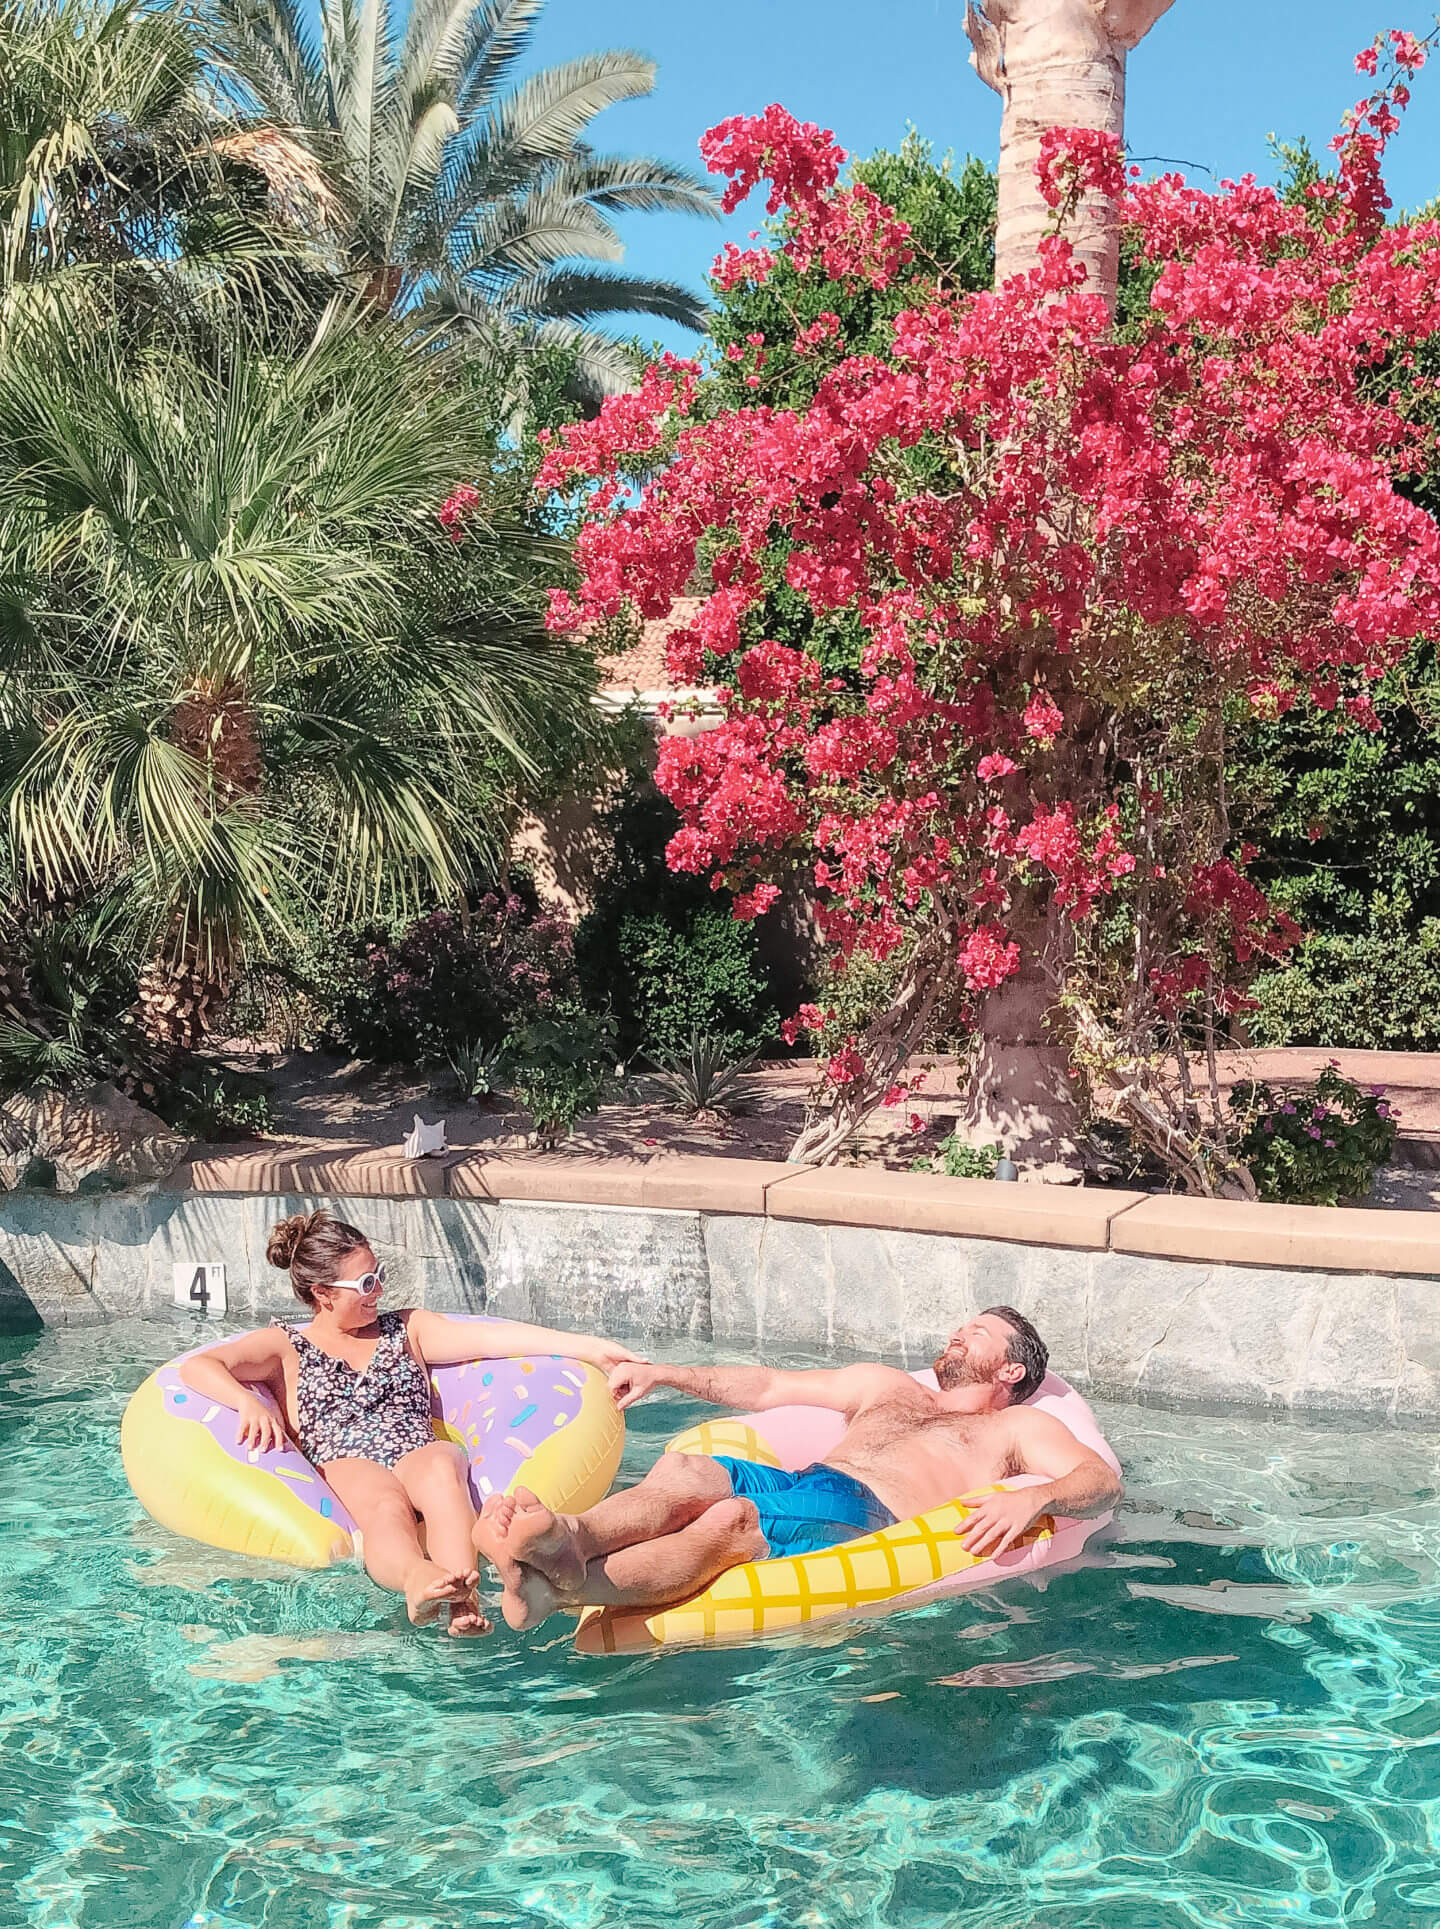 A couple sit in pool floaties soaking up the sunshine in a pool in Palm springs.